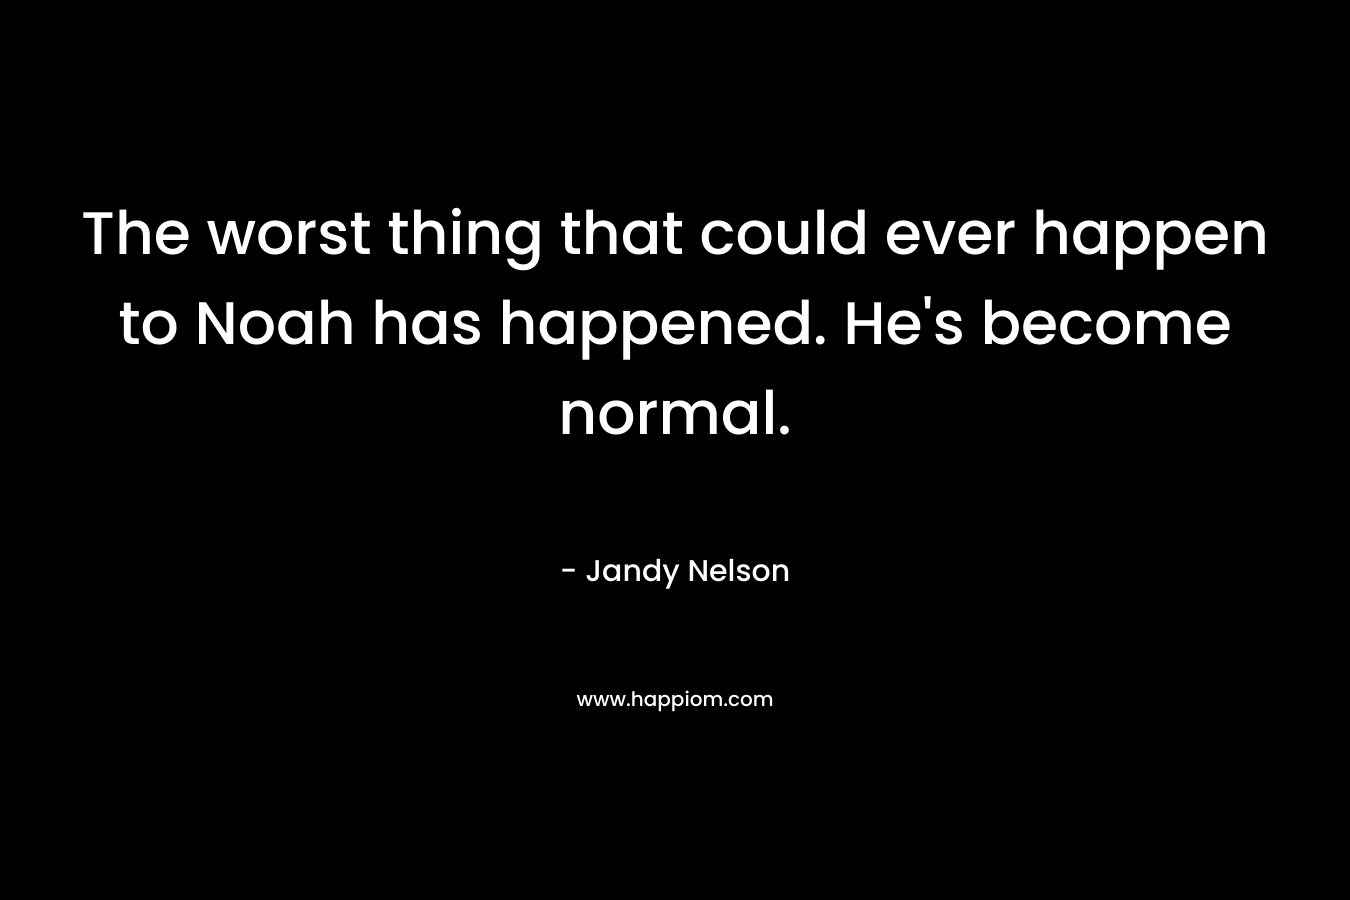 The worst thing that could ever happen to Noah has happened. He’s become normal. – Jandy Nelson